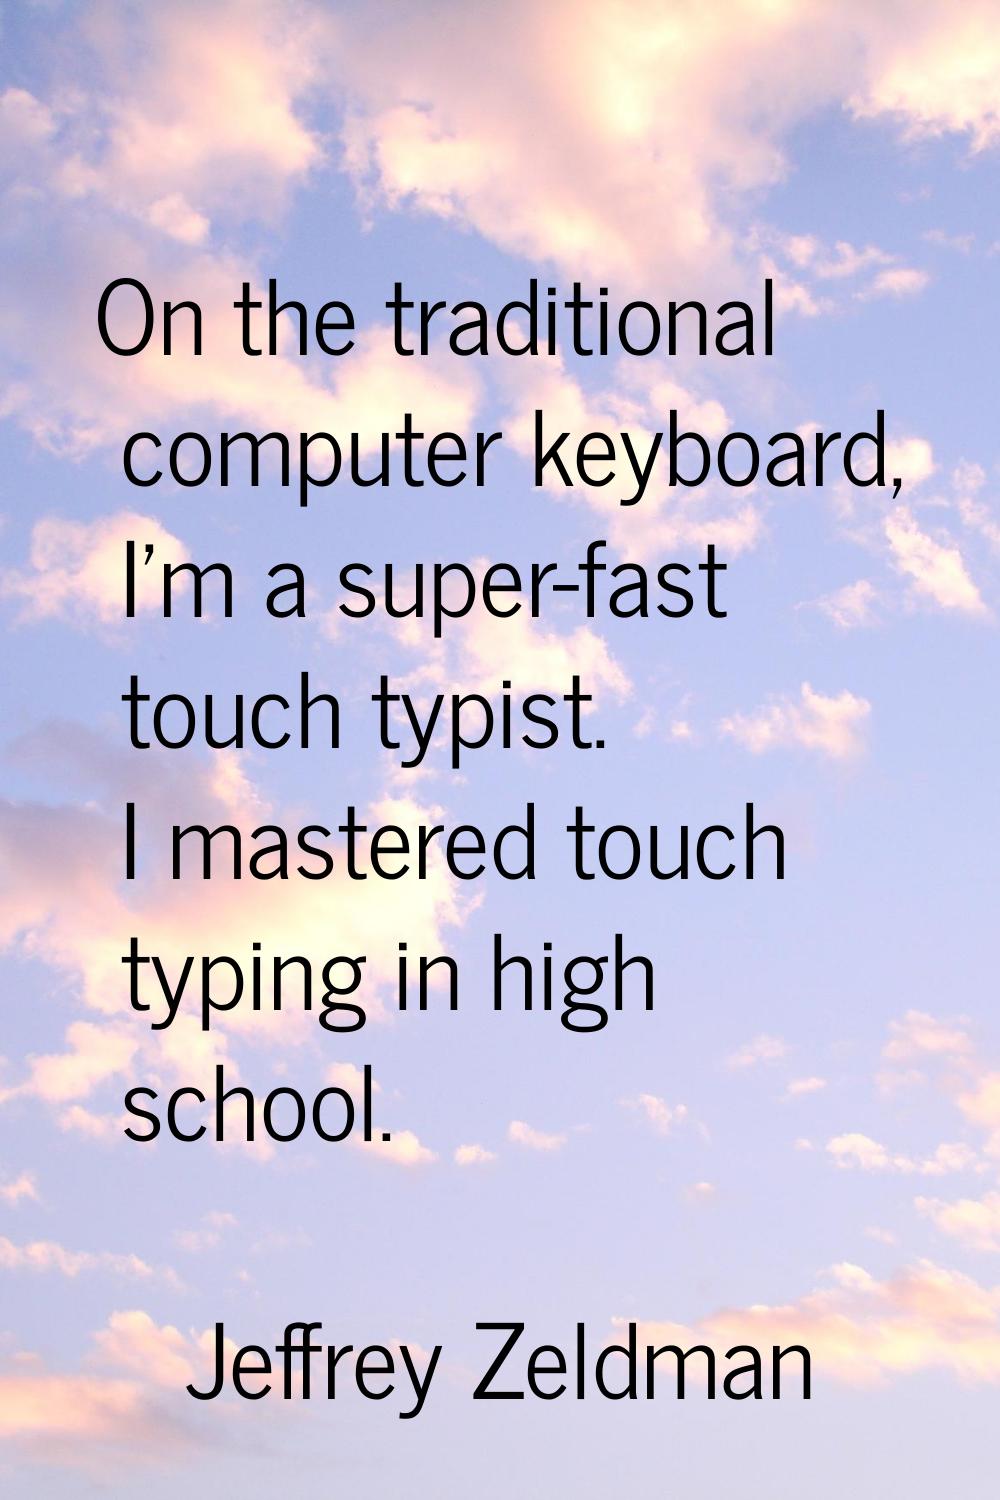 On the traditional computer keyboard, I'm a super-fast touch typist. I mastered touch typing in hig